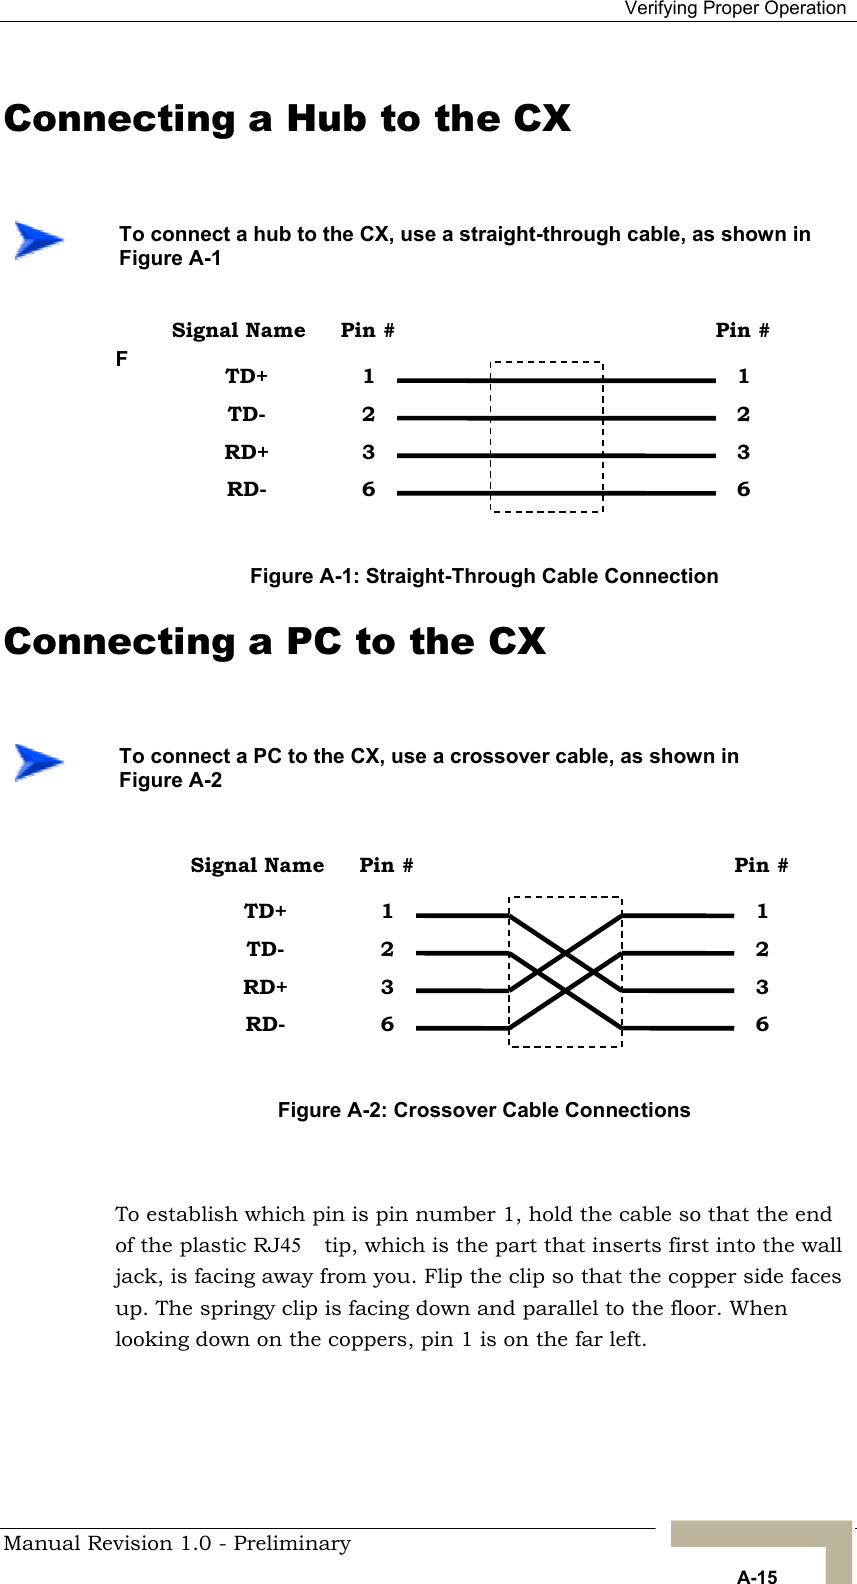  Verifying Proper Operation Connecting a Hub to the CX    To connect a hub to the CX, use a straight-through cable, as shown in Figure A-1 Pin # 1 2 3 6 Signal Name TD+ TD- RD+ RD- Pin # 1 2 3 6  F Figure A-1: Straight-Through Cable Connection Connecting a PC to the CX    To connect a PC to the CX, use a crossover cable, as shown in  Figure A-2 Pin # 1 2 3 6 Signal Name TD+ TD- RD+ RD- Pin # 1 2 3 6 Figure A-2: Crossover Cable Connections  o establish which pin is pin number 1, hold the cable so that the end Tof the plastic RJ 45  tip, which is the part that inserts first into the wall jack, is facing away from you. Flip the clip so that the copper side faces up. The springy clip is facing down and parallel to the floor. When looking down on the coppers, pin 1 is on the far left.   Manual Revision 1.0 - Preliminary   A-15 